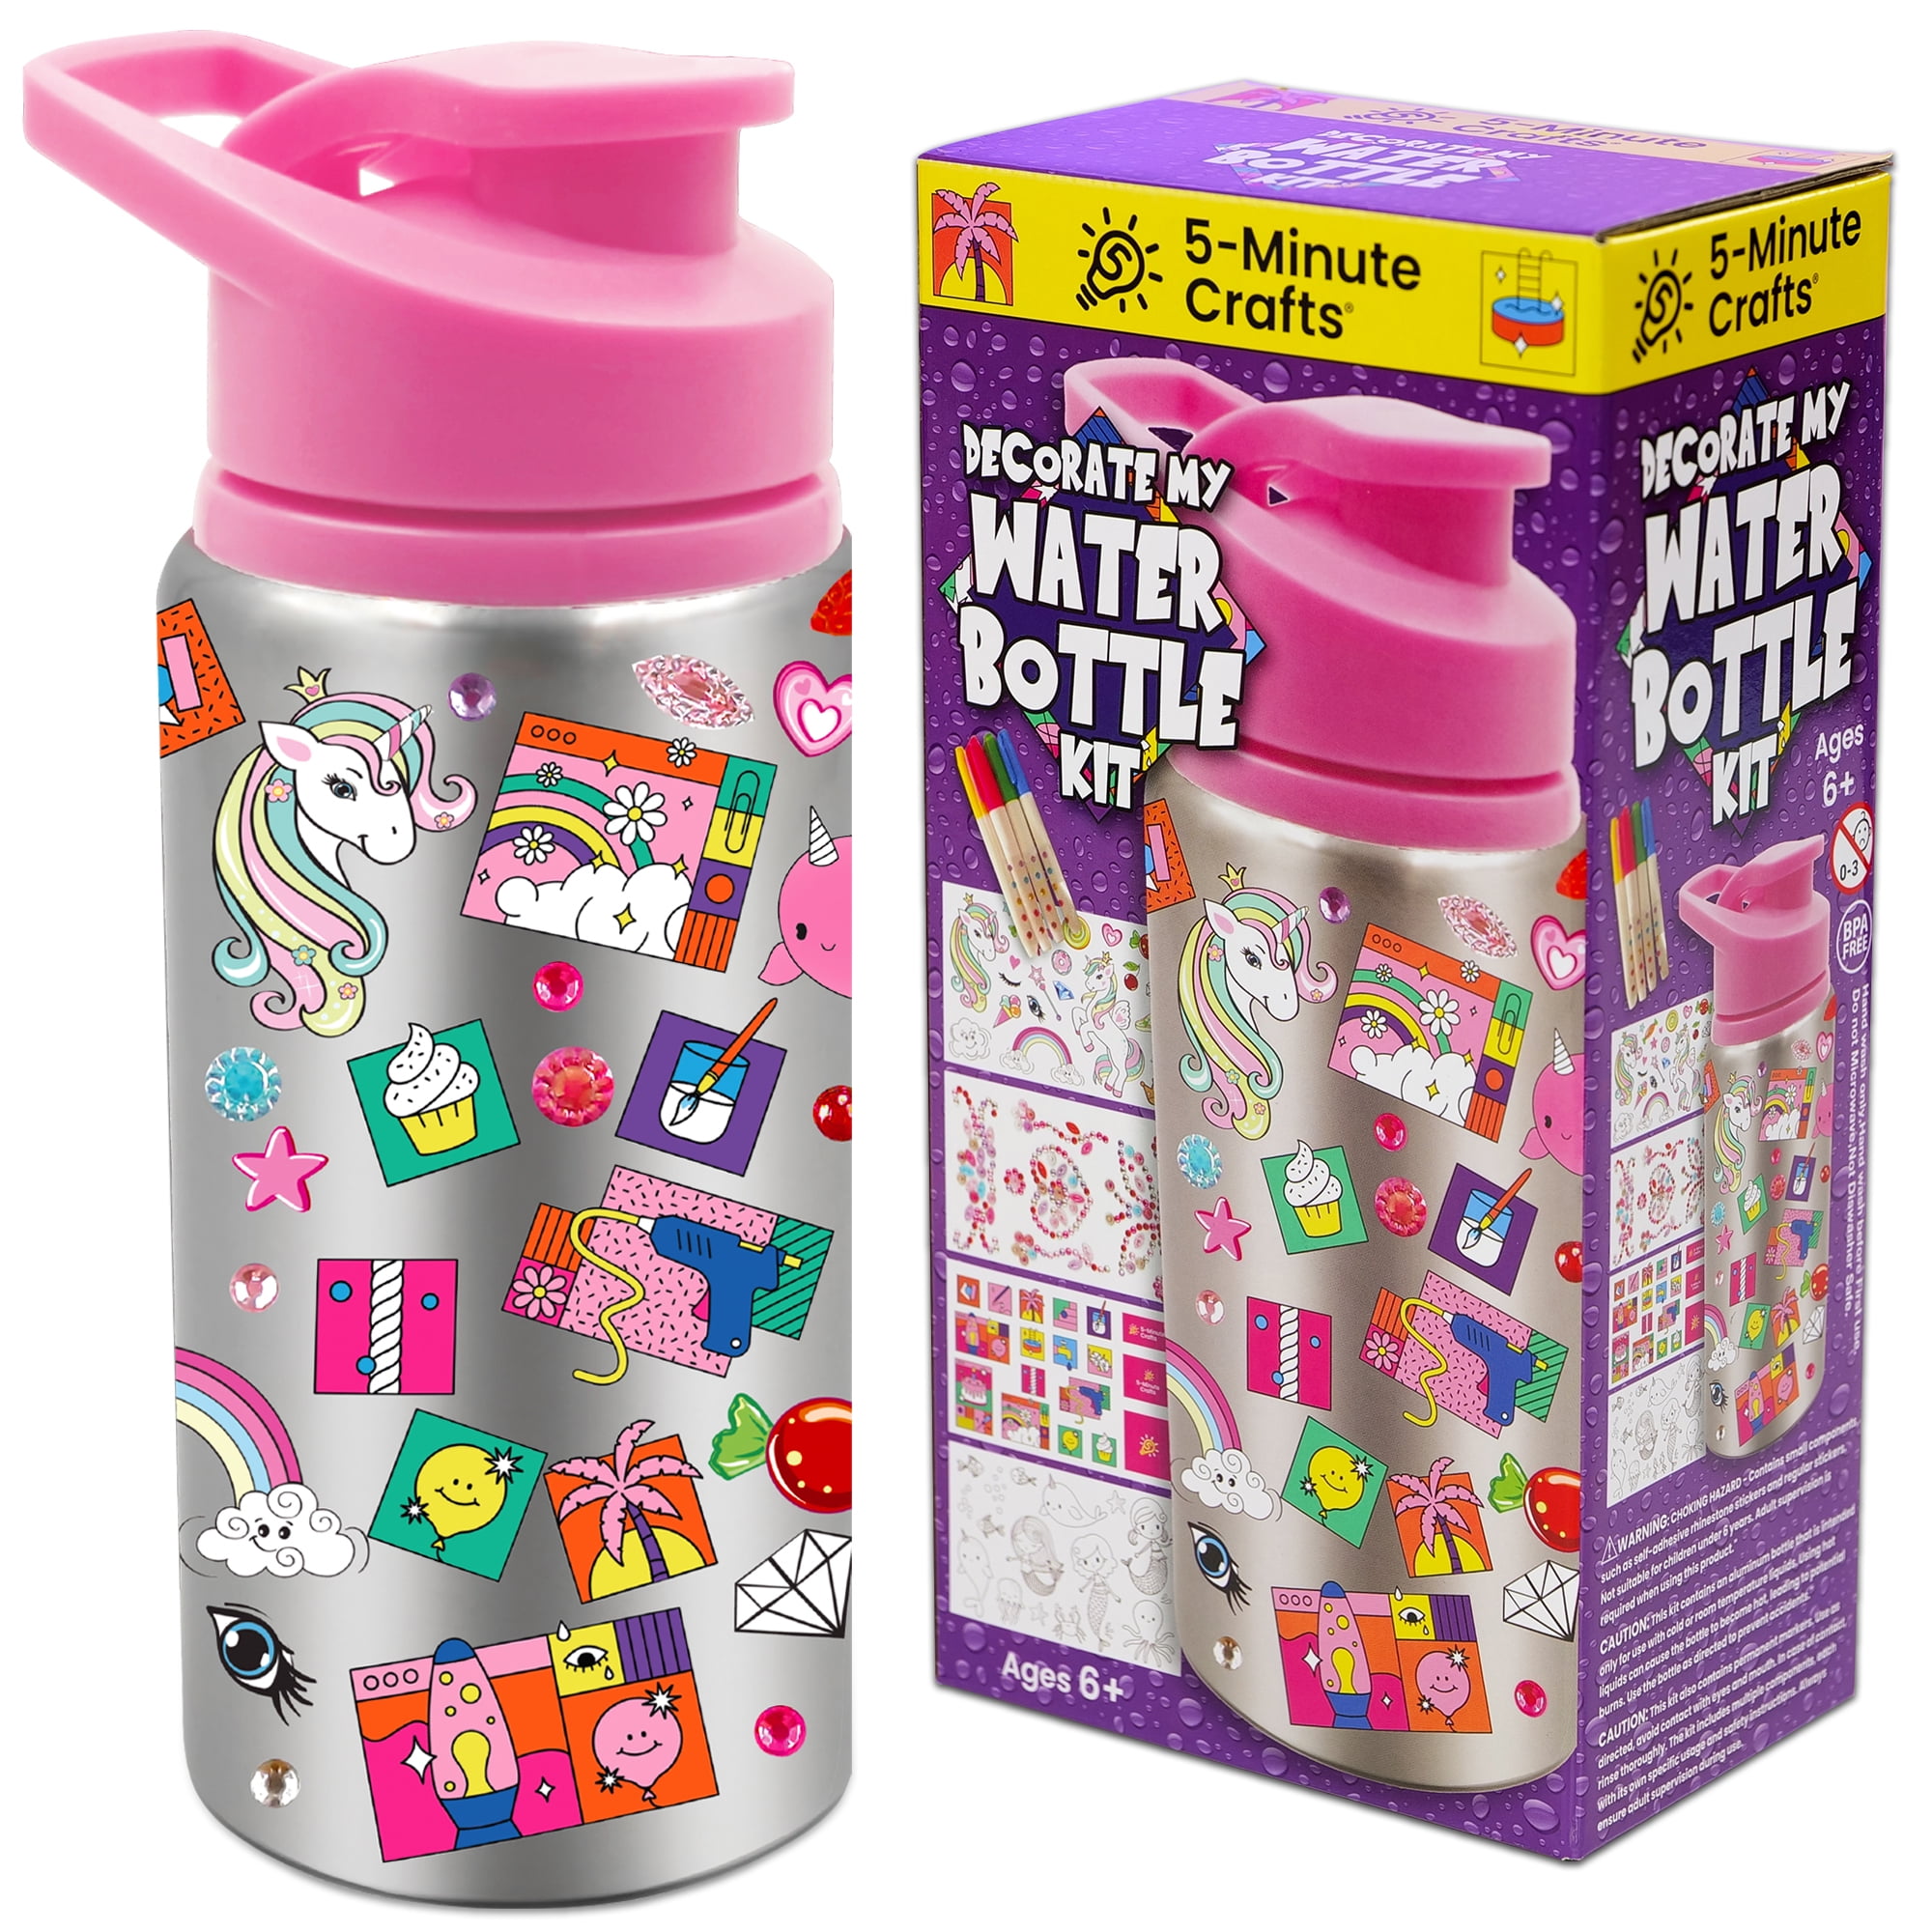 Decorate Your Own Water Bottles With Gem Art Stickers, Kids Arts Crafts Diy  Making Kit Birthday Gifts For Girls